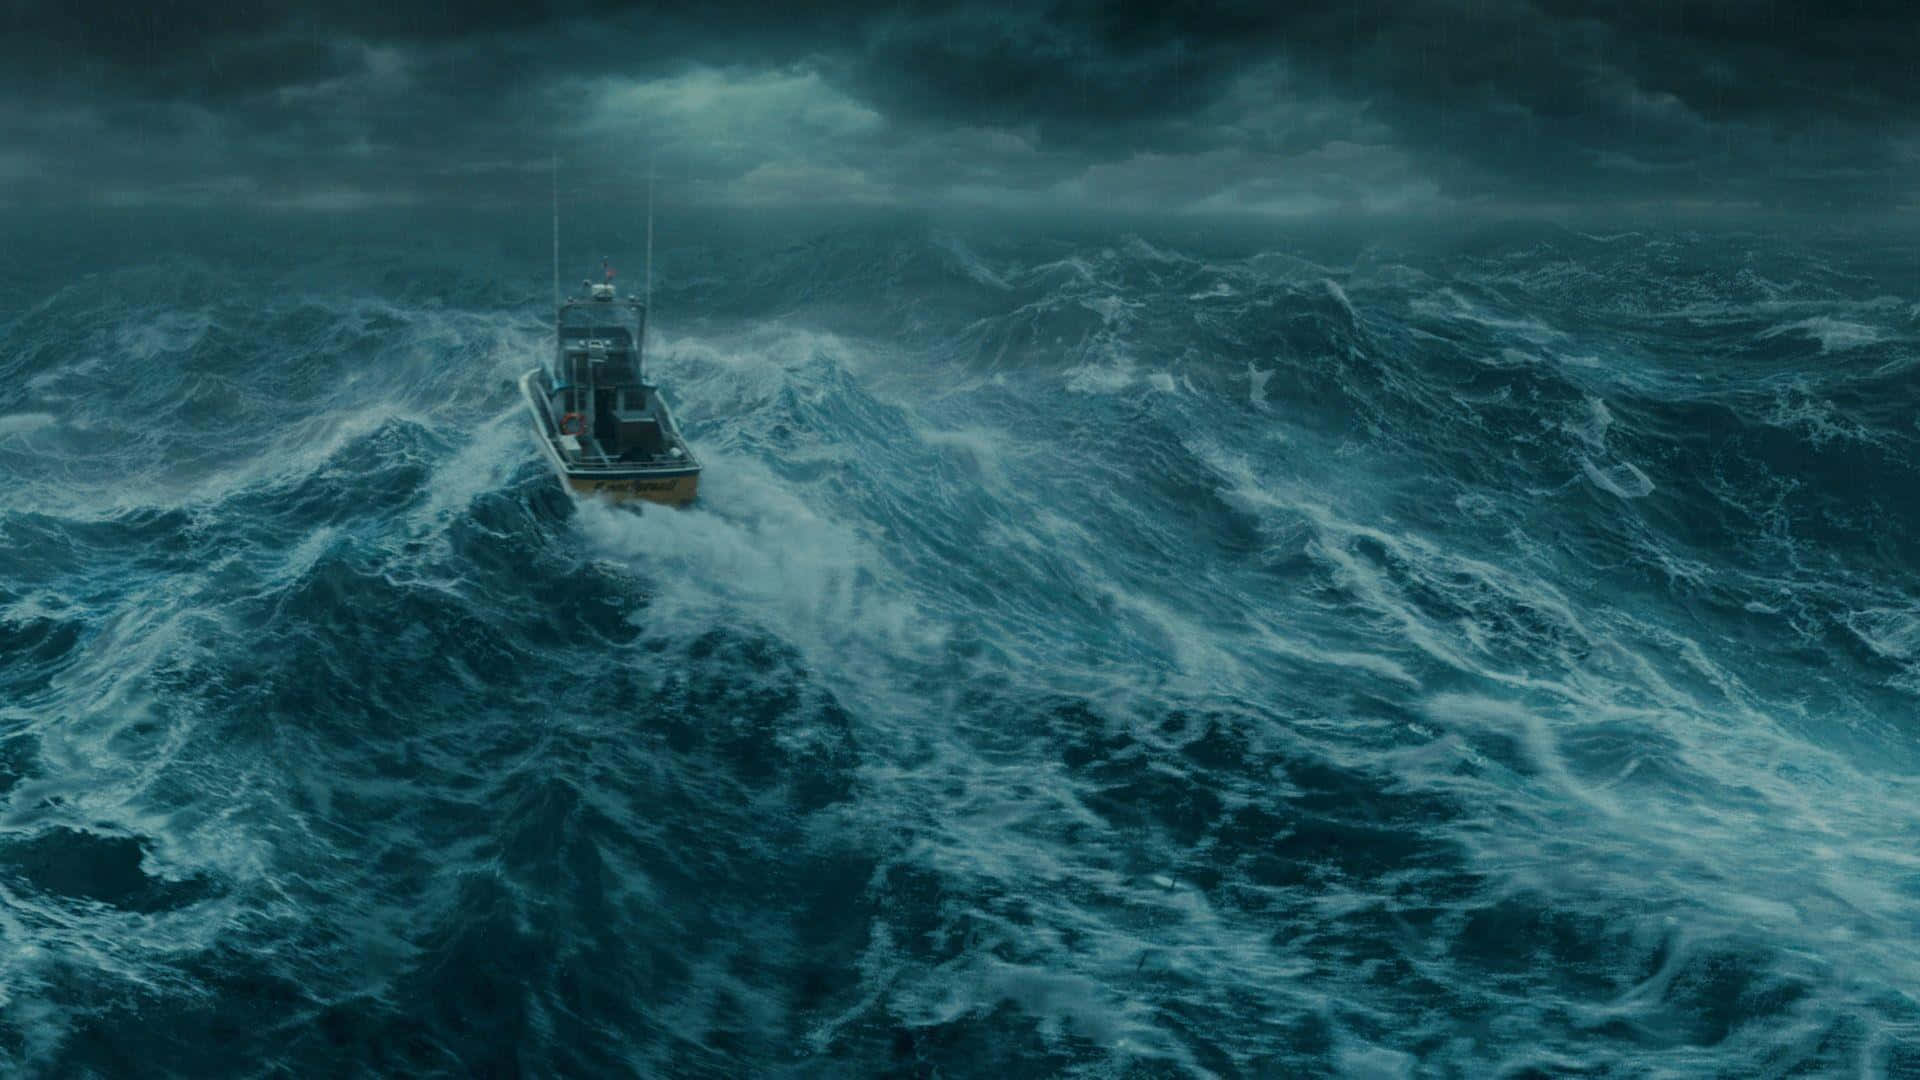 Experience the Power of an Ocean Storm Wallpaper